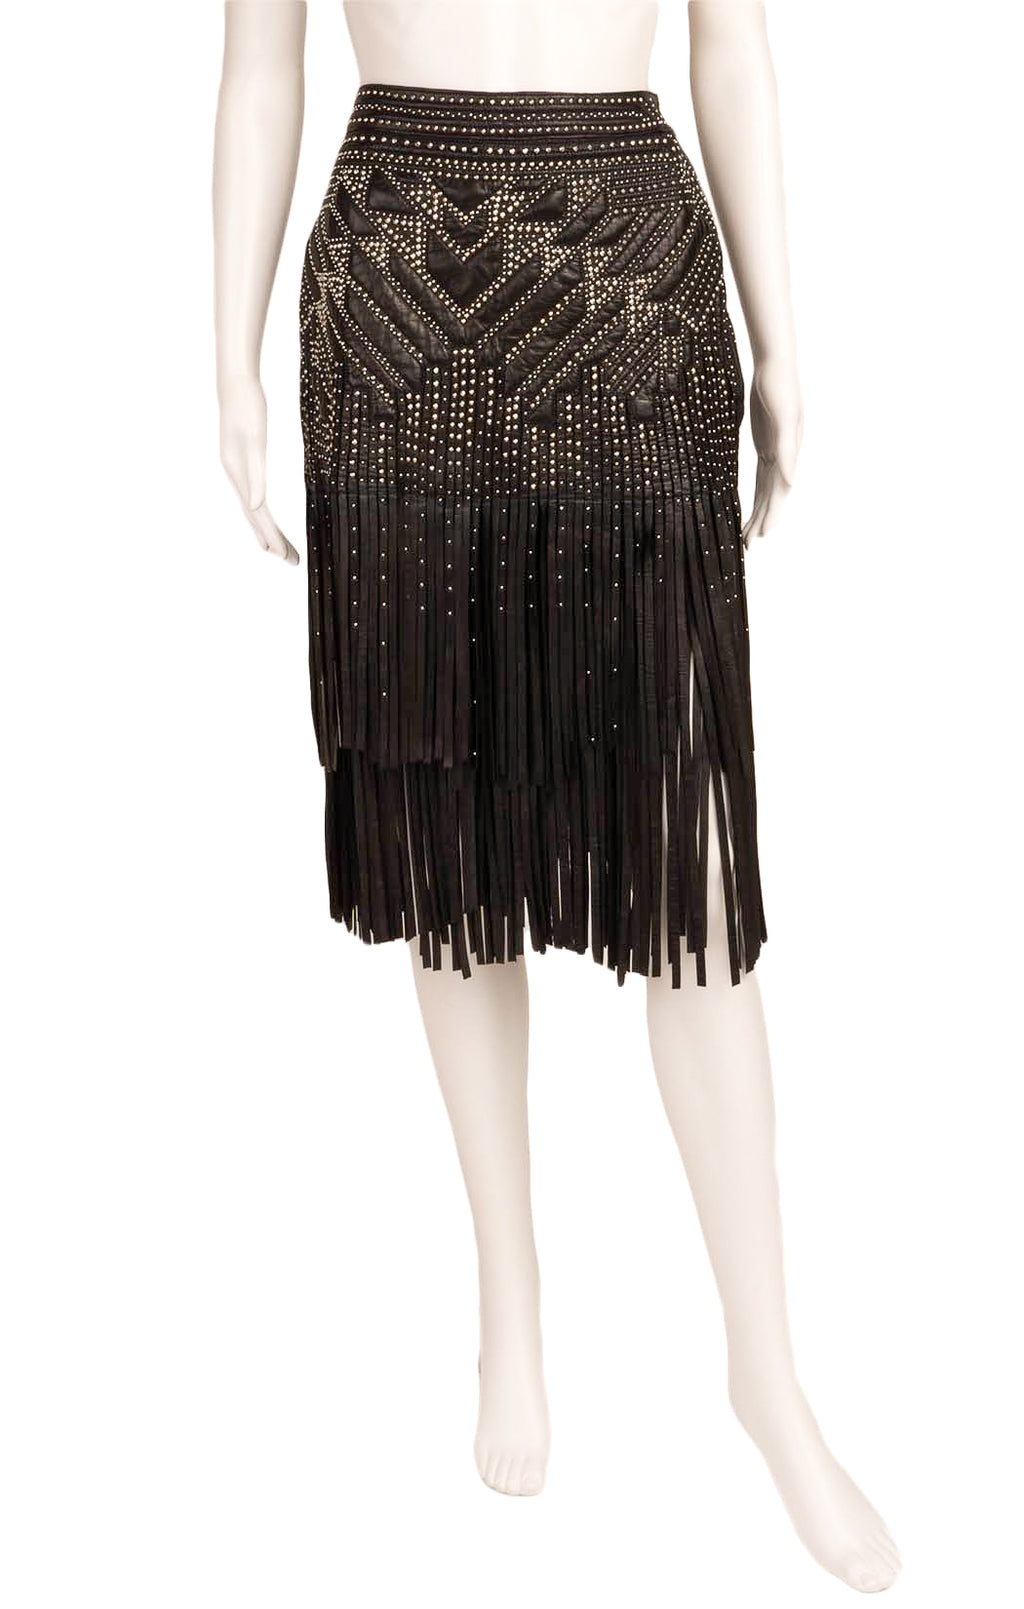 ROBERTO CAVALLI Skirt Size: IT 46 (comparable to US 10)